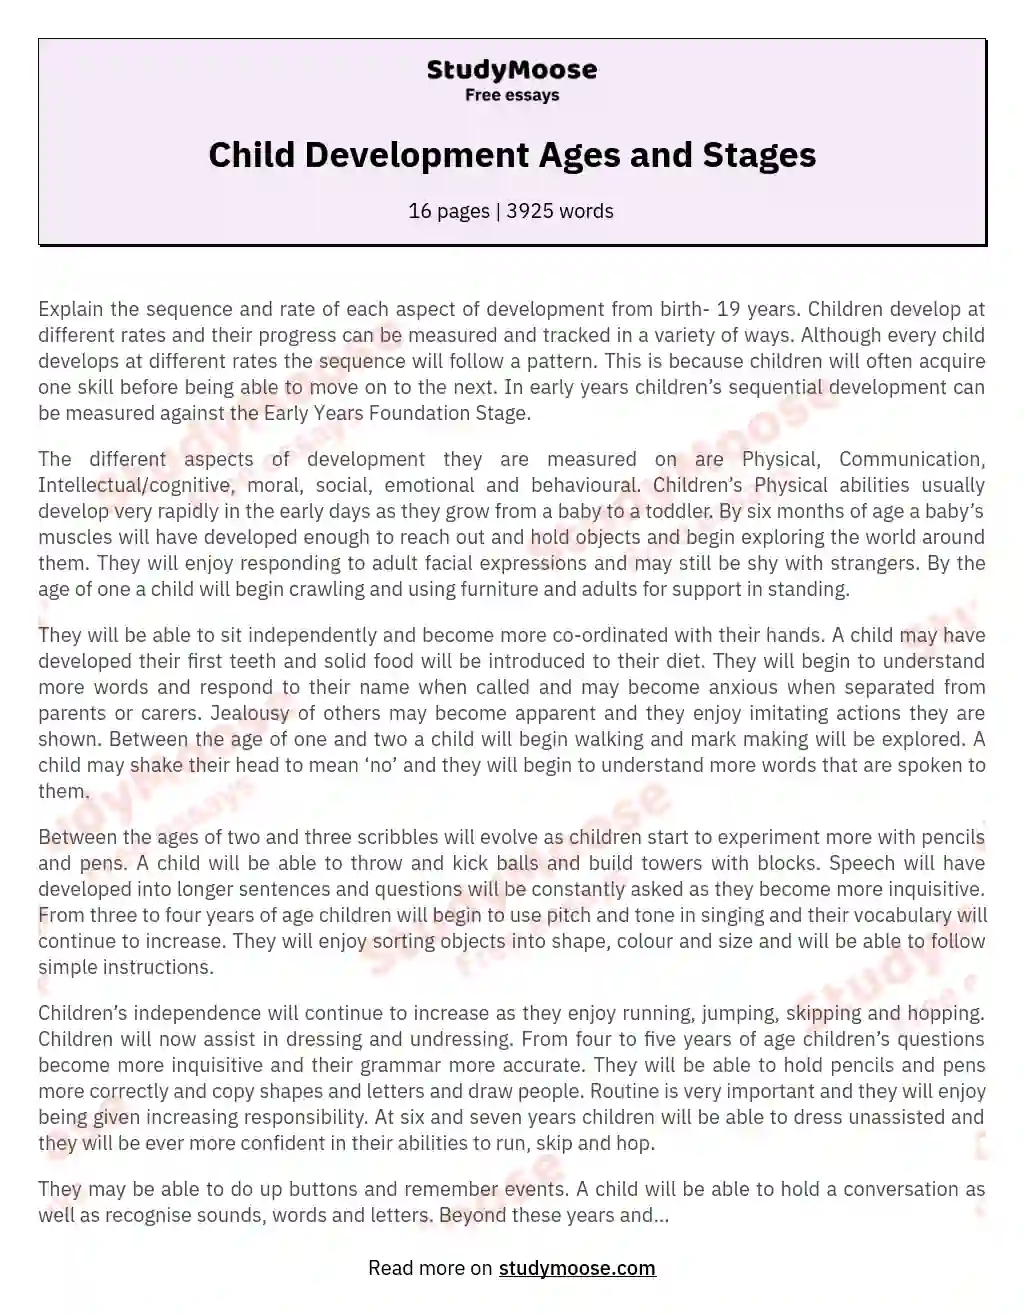 Child Development Ages and Stages